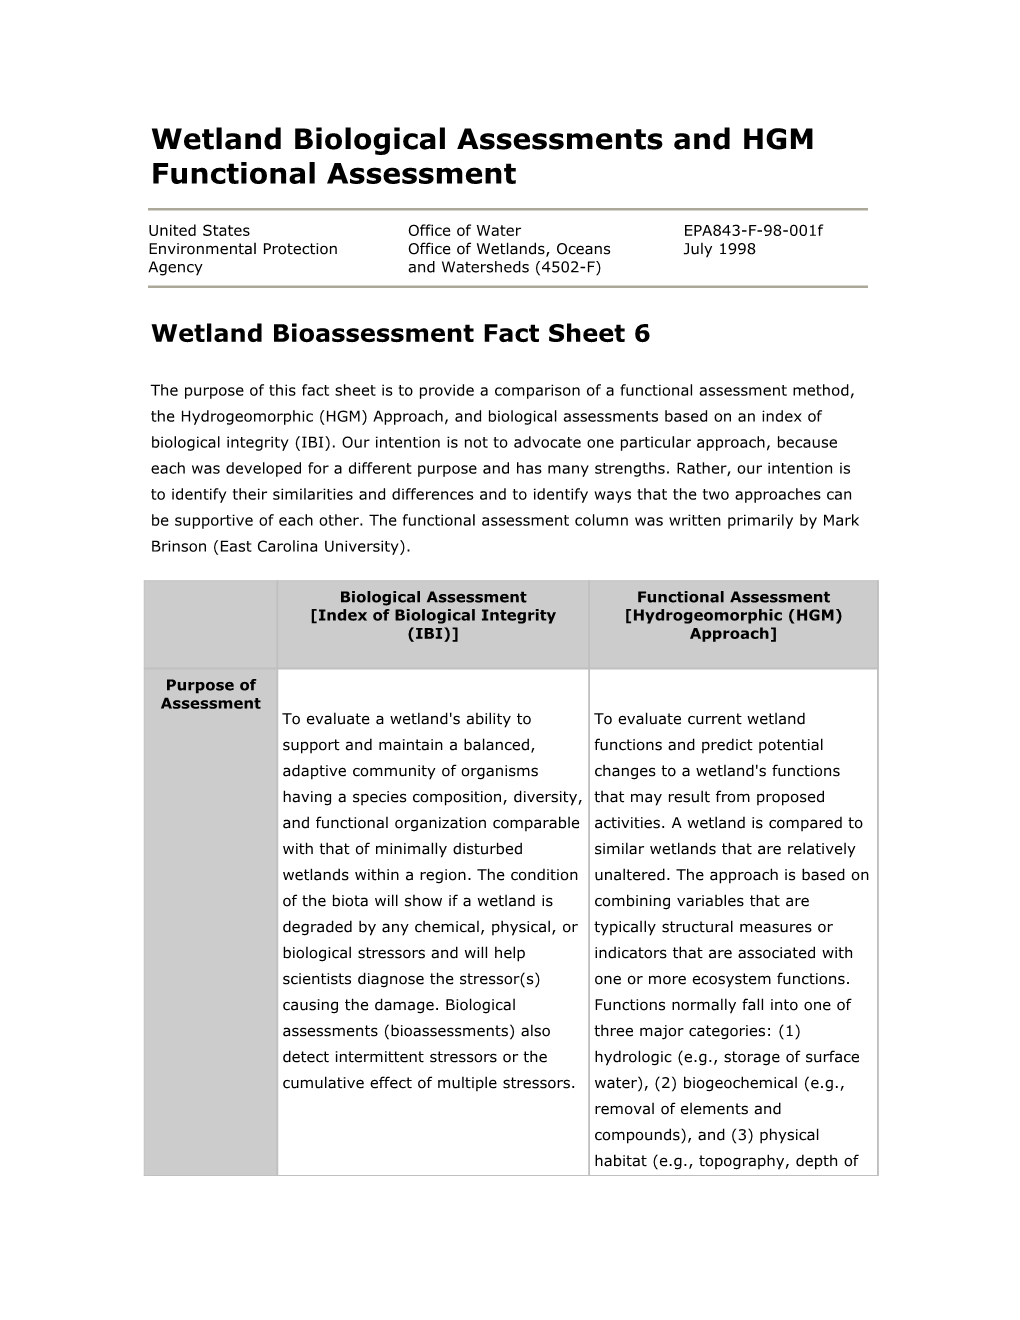 Wetland Biological Assessments and HGM Functional Assessment